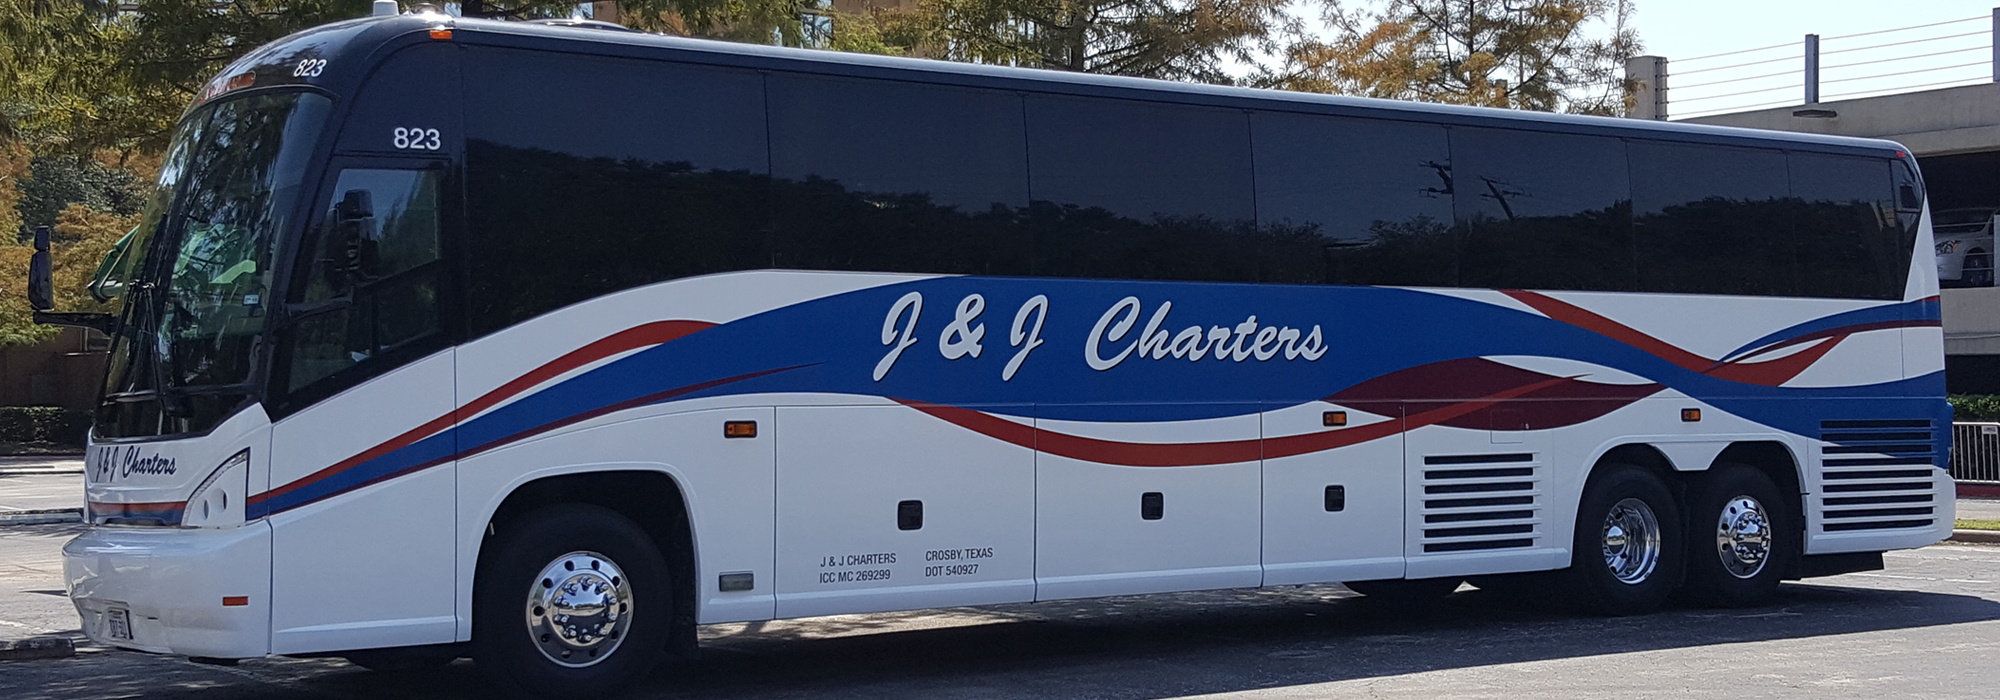 j&j tours and charters reviews